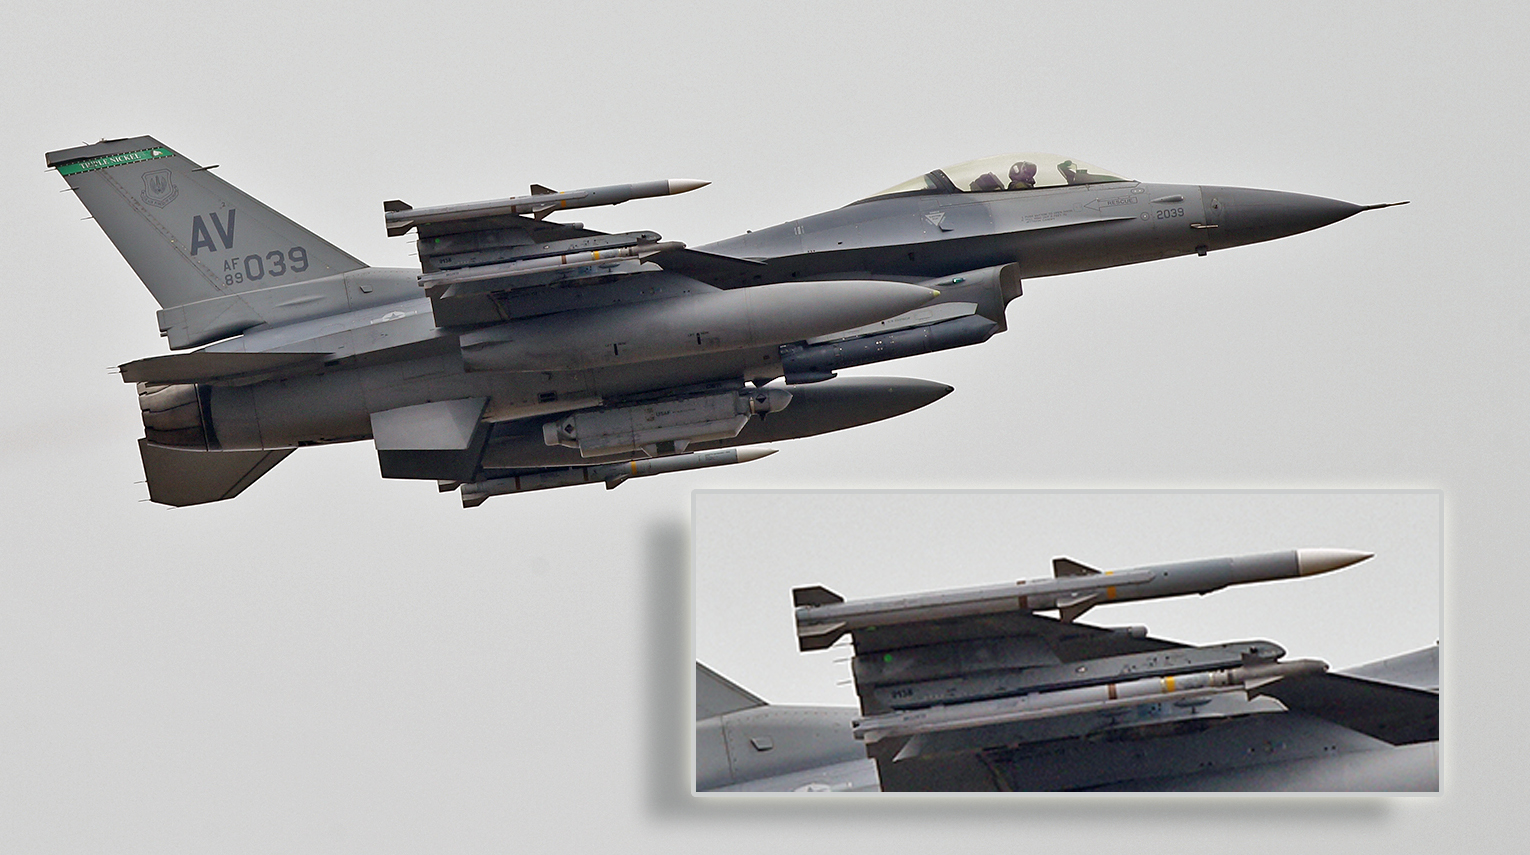 Two U S F 16s From Aviano Ab Have Carried Out A Mission Over Eastern Europe Carrying Live Missiles Today The Aviationist